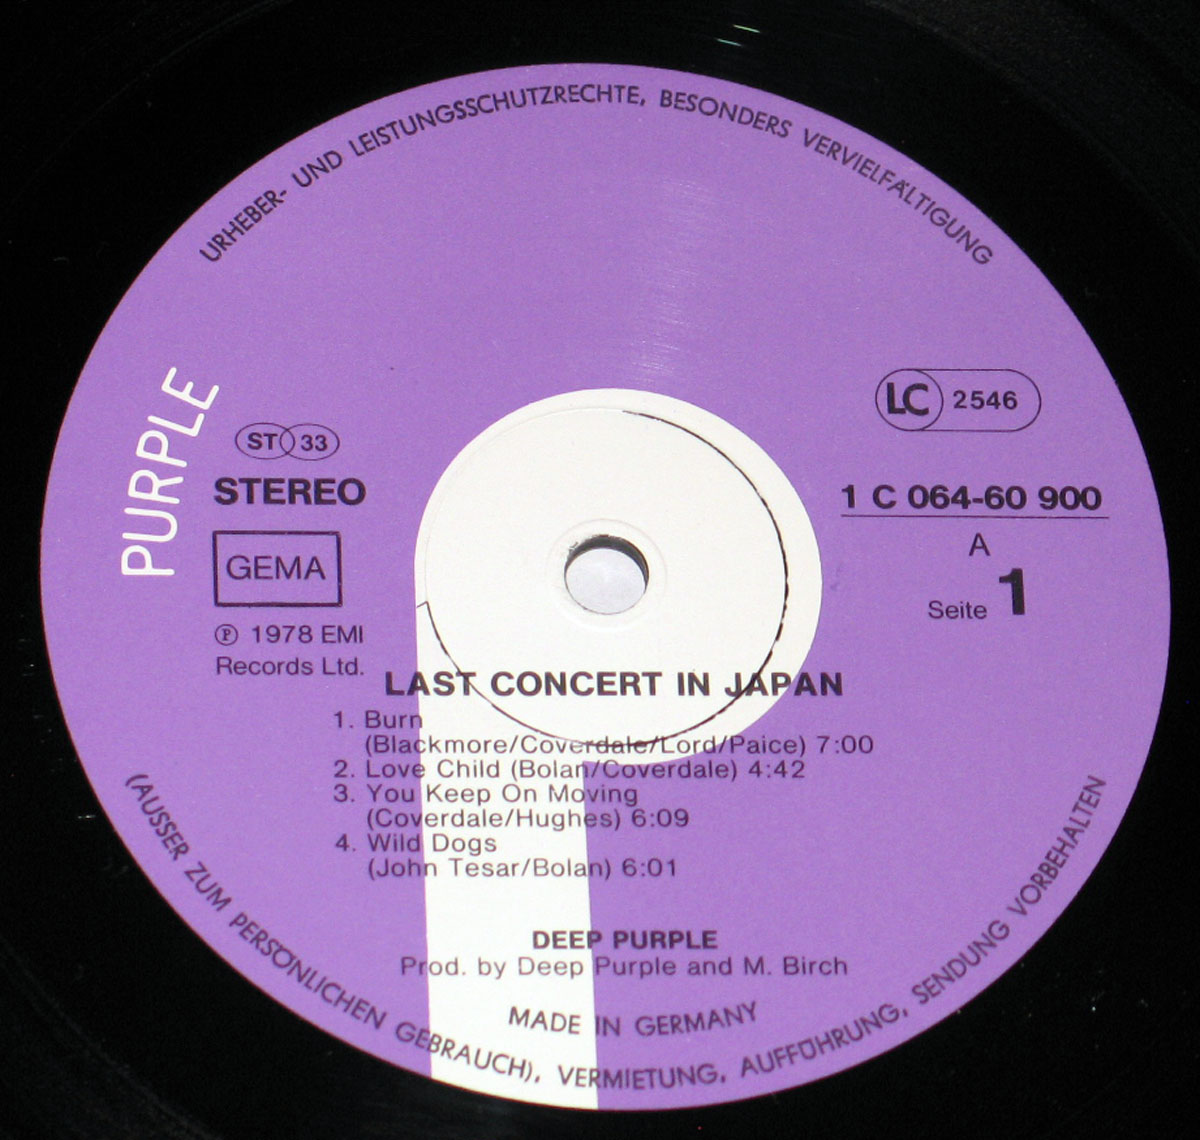 High Resolution    Photo of the record's label DEEP PURPLE Last Concert in Japan 